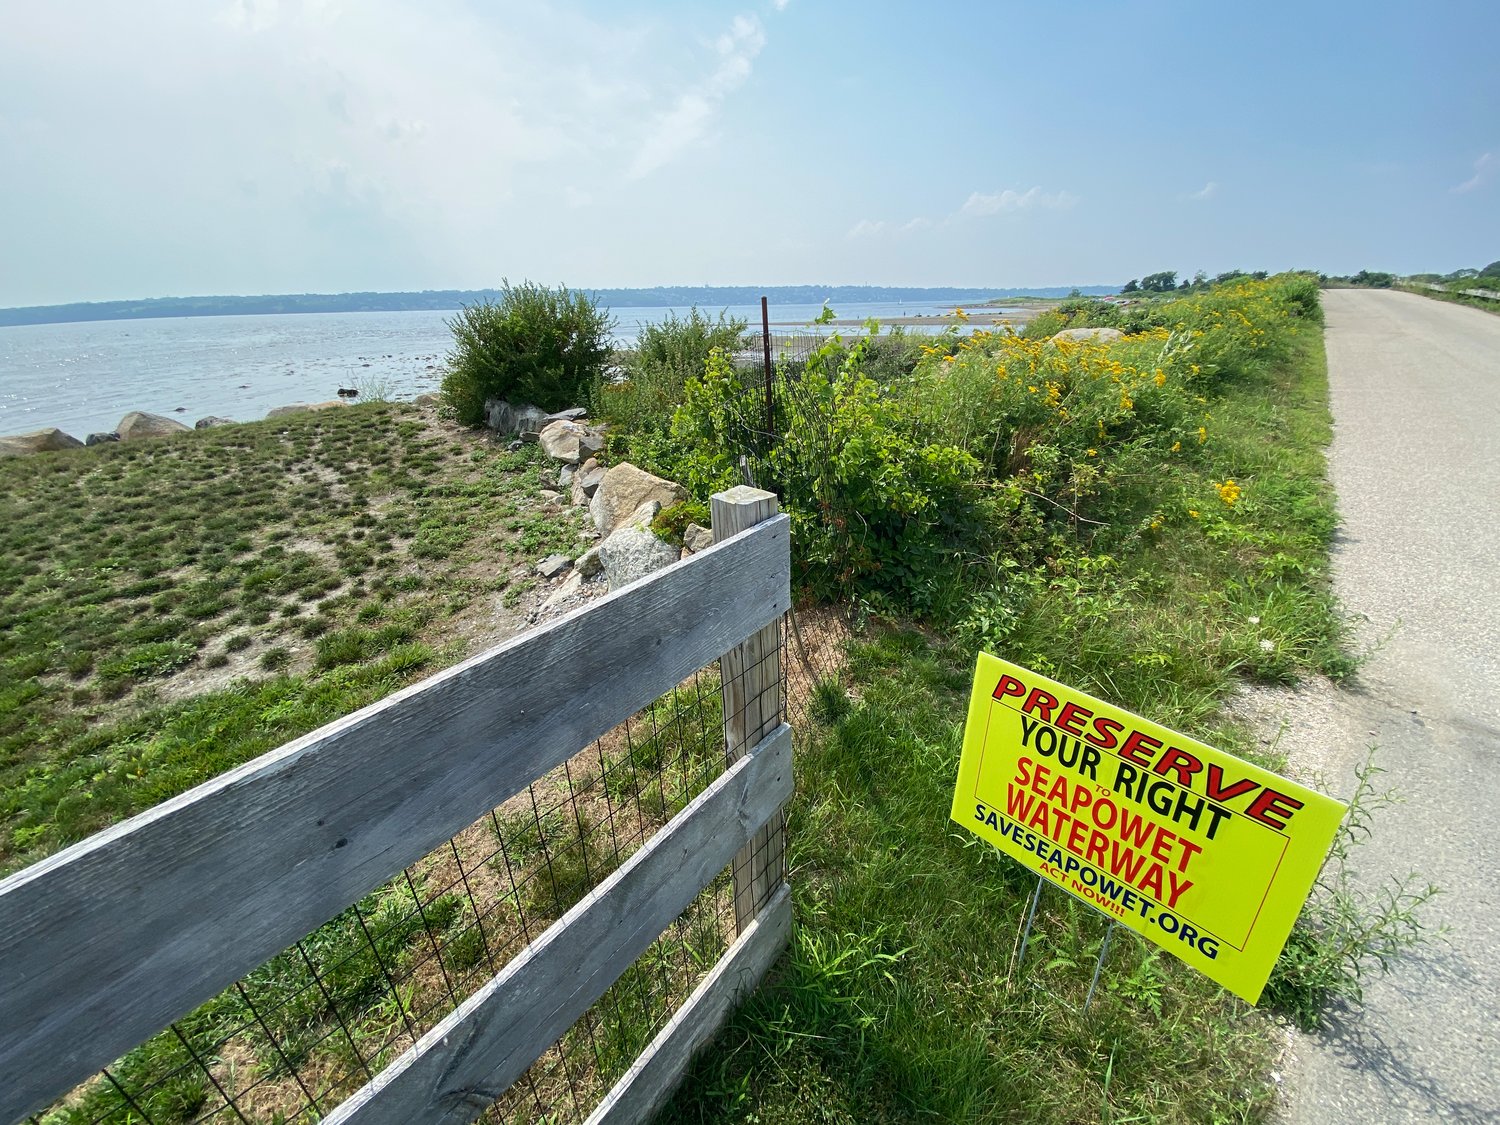 Seapowet area residents opposed to two oyster farms off their shores have mobilized in recent weeks, planting hundreds of signs, launching a website and raising more than $12,000 to cover legal fees.